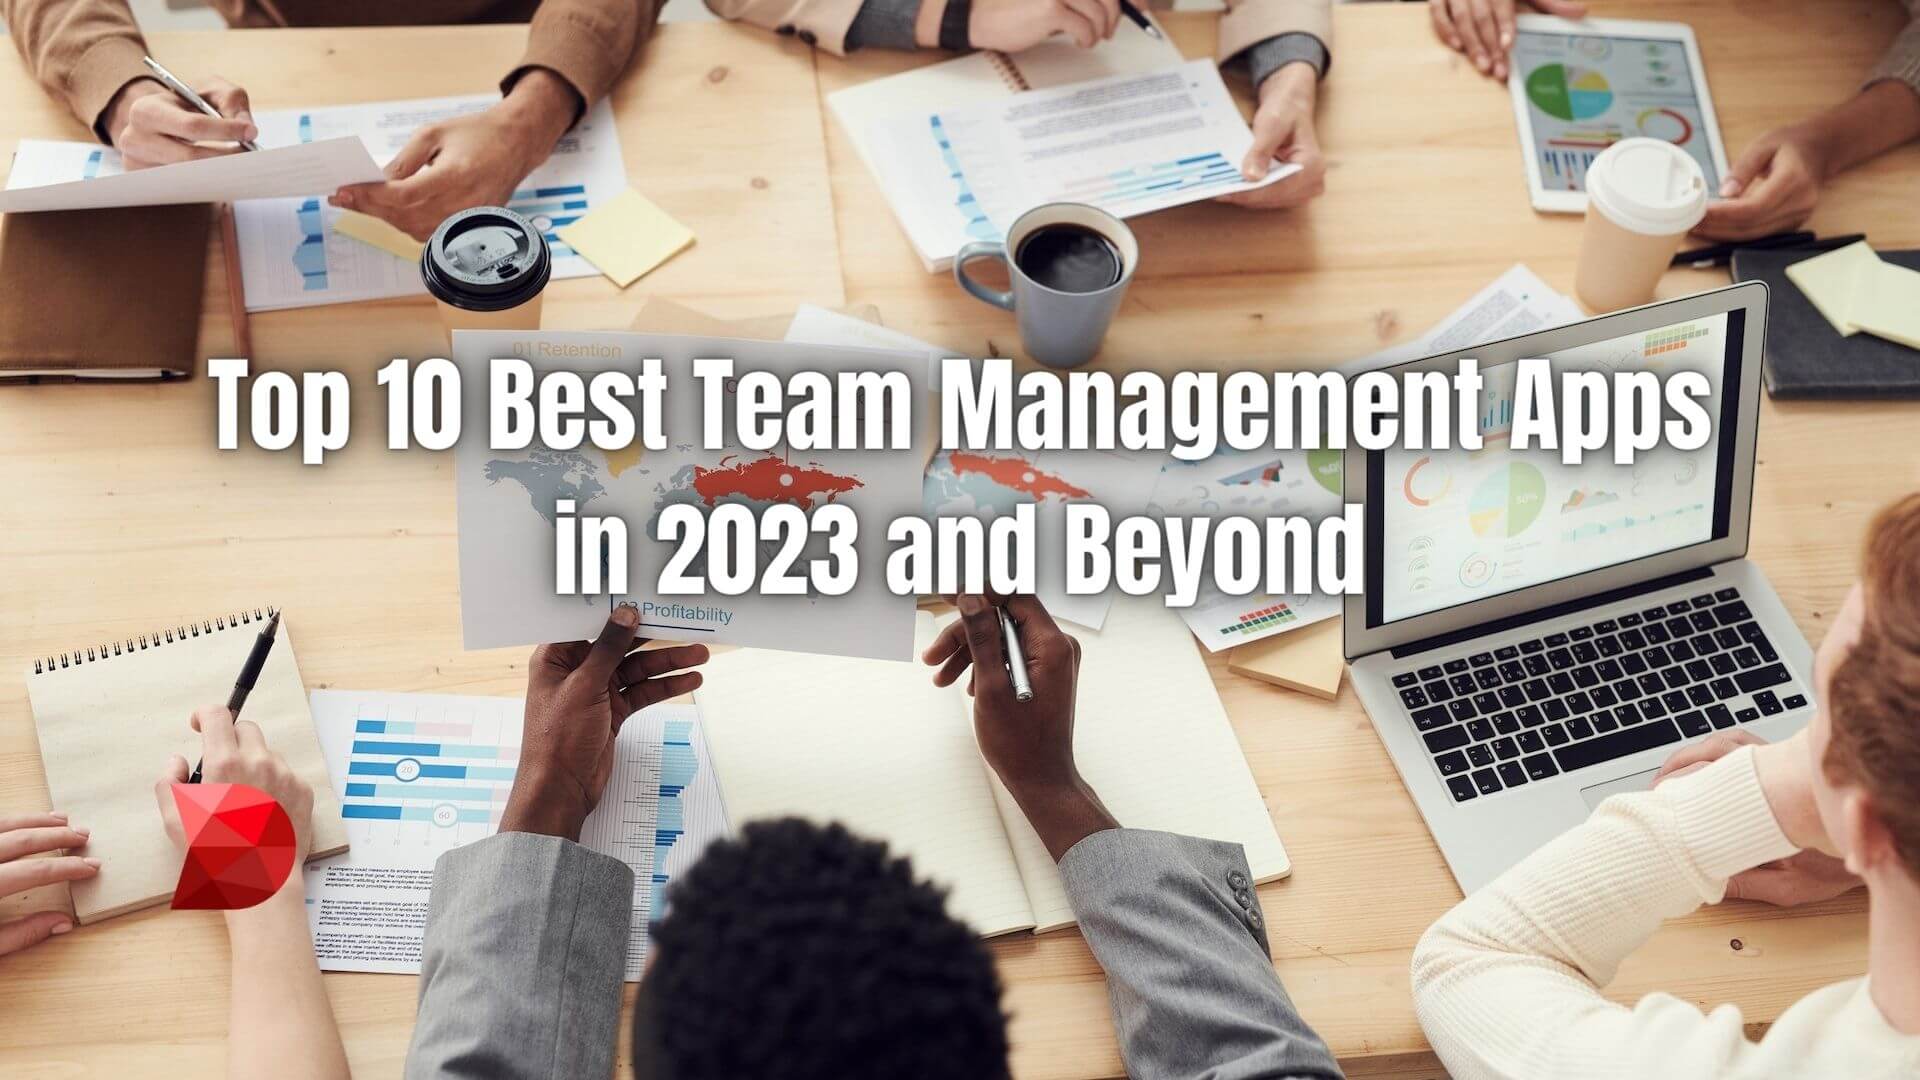 Effective team management is crucial in today's fast-paced business world. Here are the top team management apps on the market in 2023.